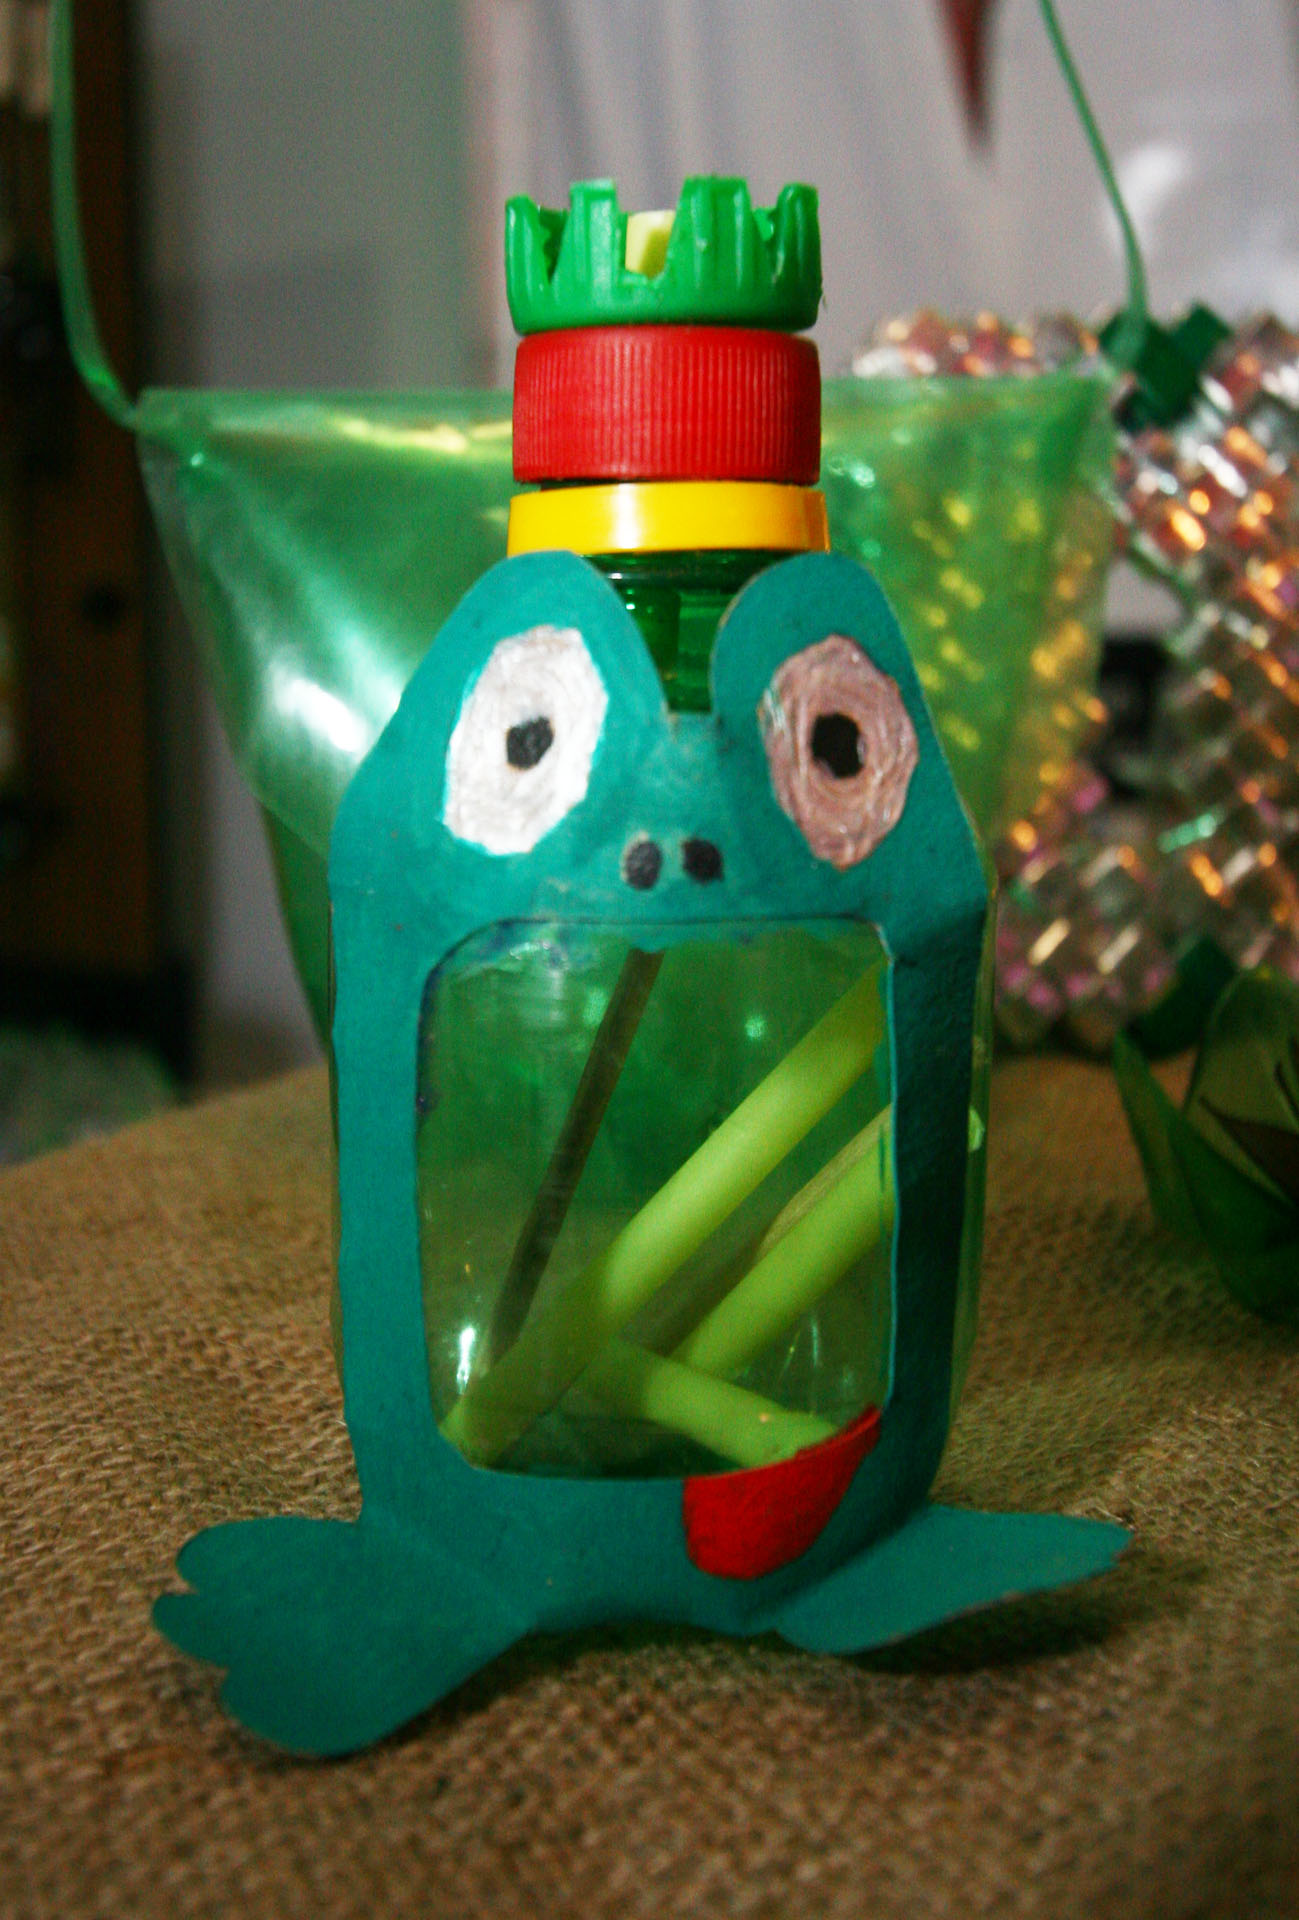 a green toy has a frog in the bottle